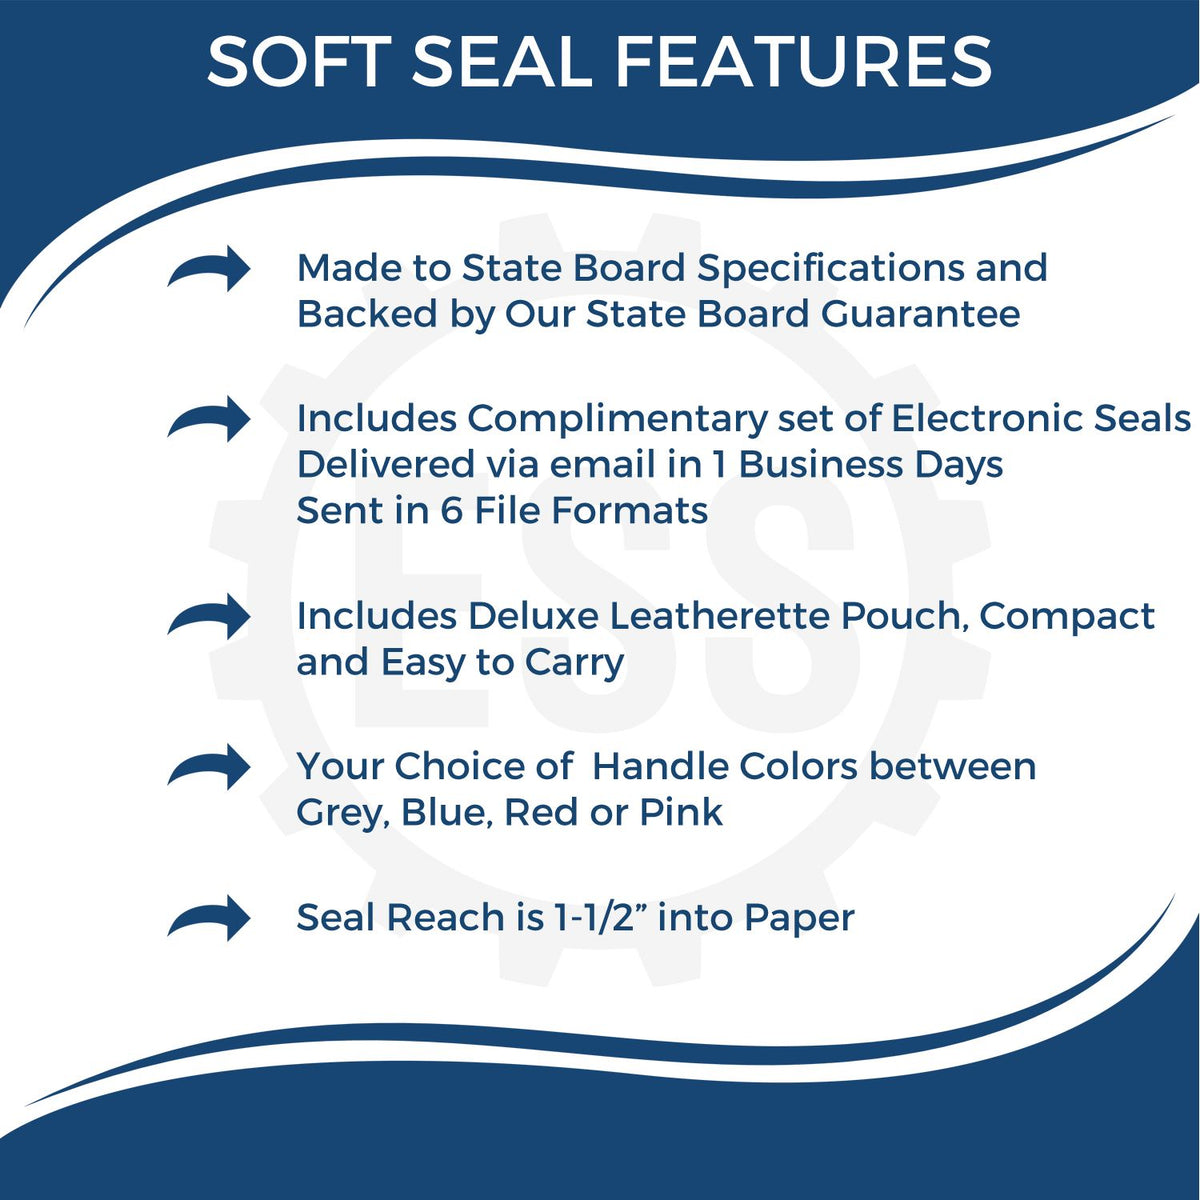 A picture of an infographic highlighting the selling points for the Soft Maine Professional Engineer Seal